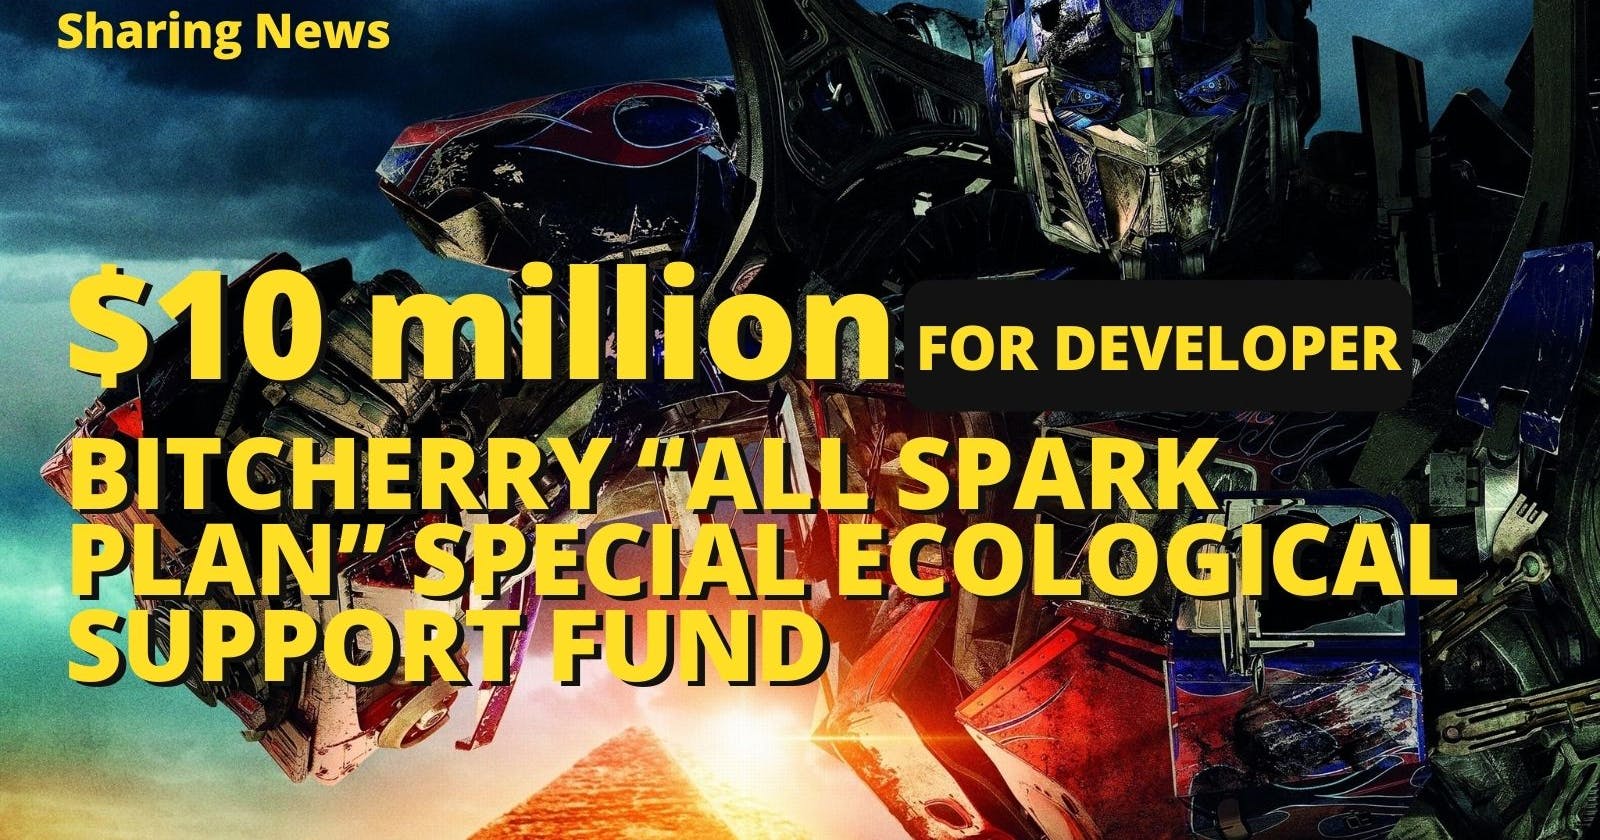 Sharing: BitCherry Official Launch the “All Spark Plan” to set up a Special Ecological Support Fund of US $10 million